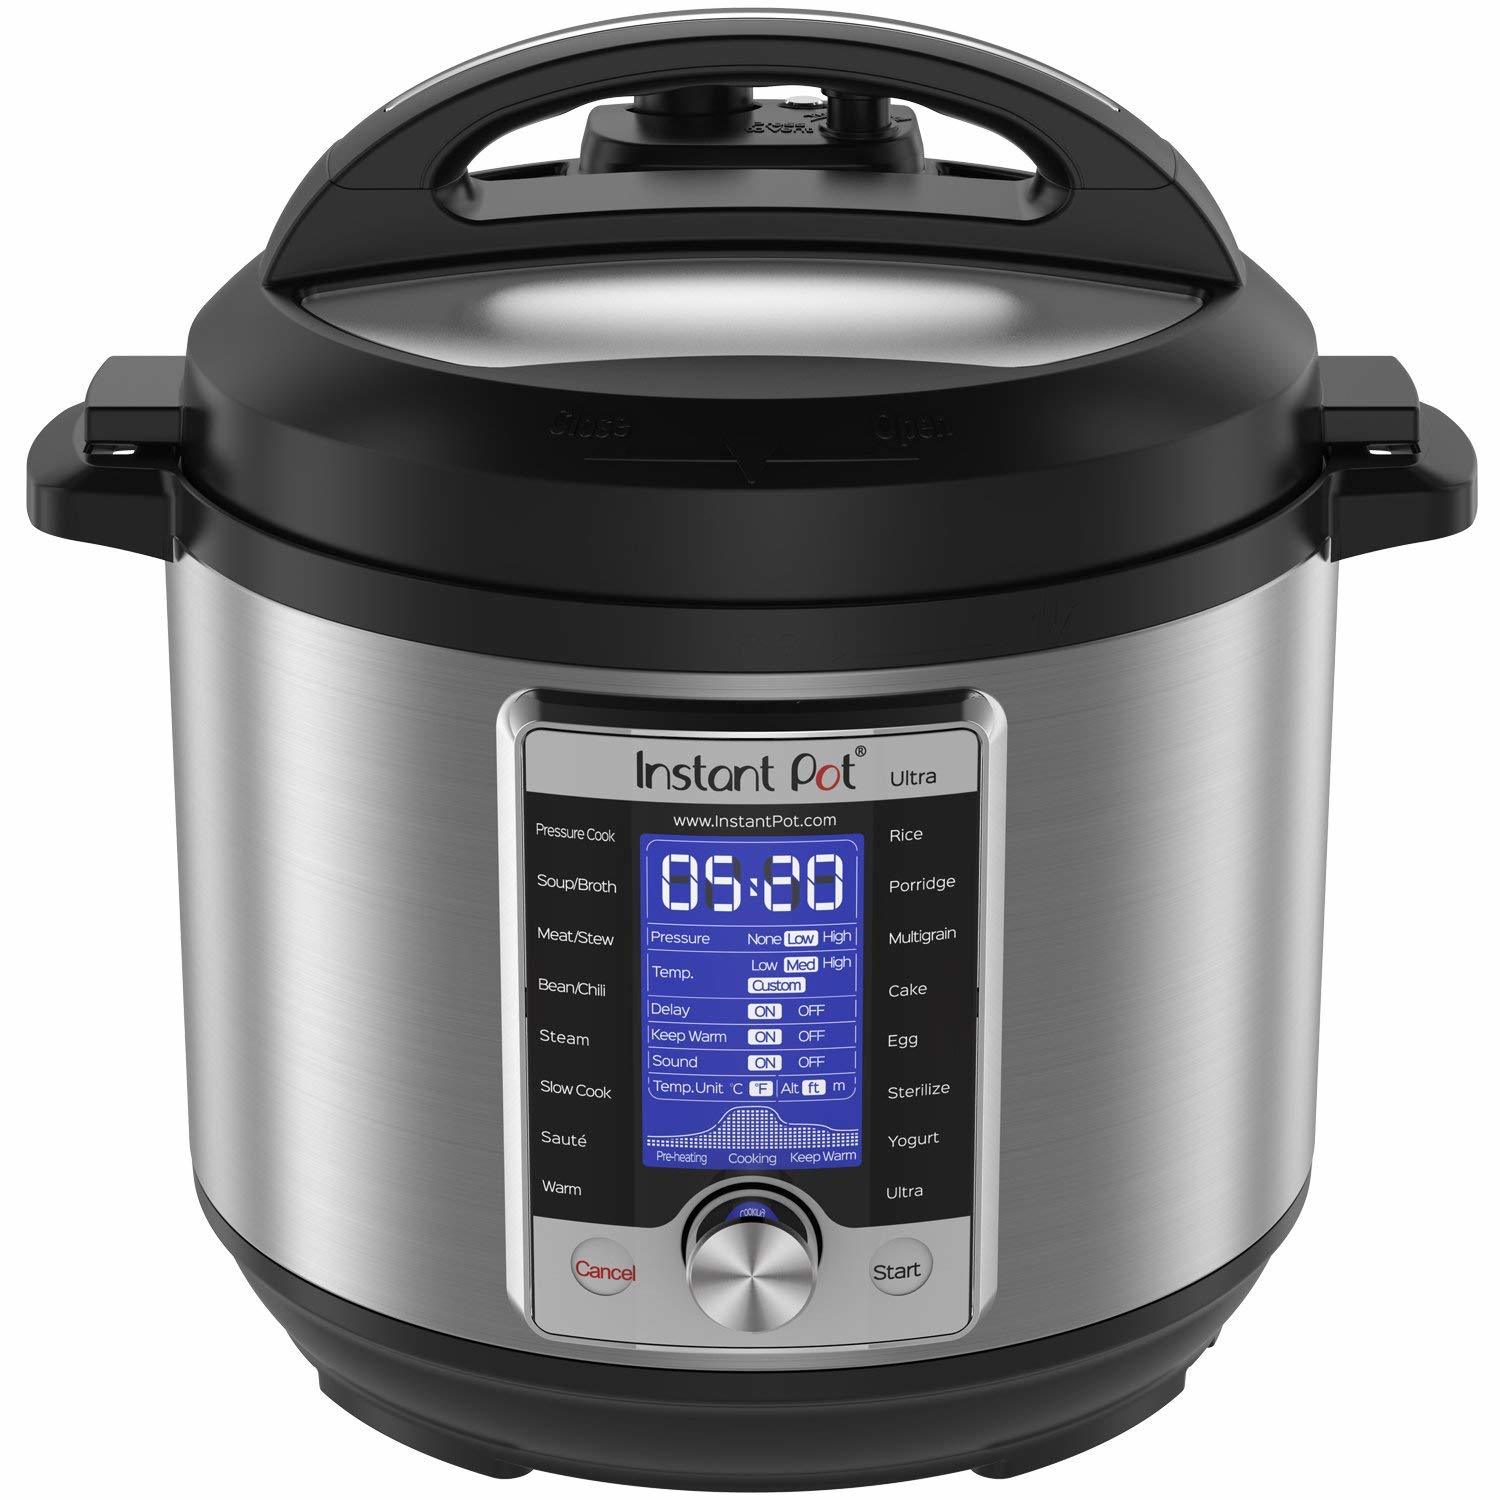 Instant Pot Ultra, Duo, And Lux Programmable Pressure Cookers From Just $43.99 Shipped From Amazon After Black Friday Savings!